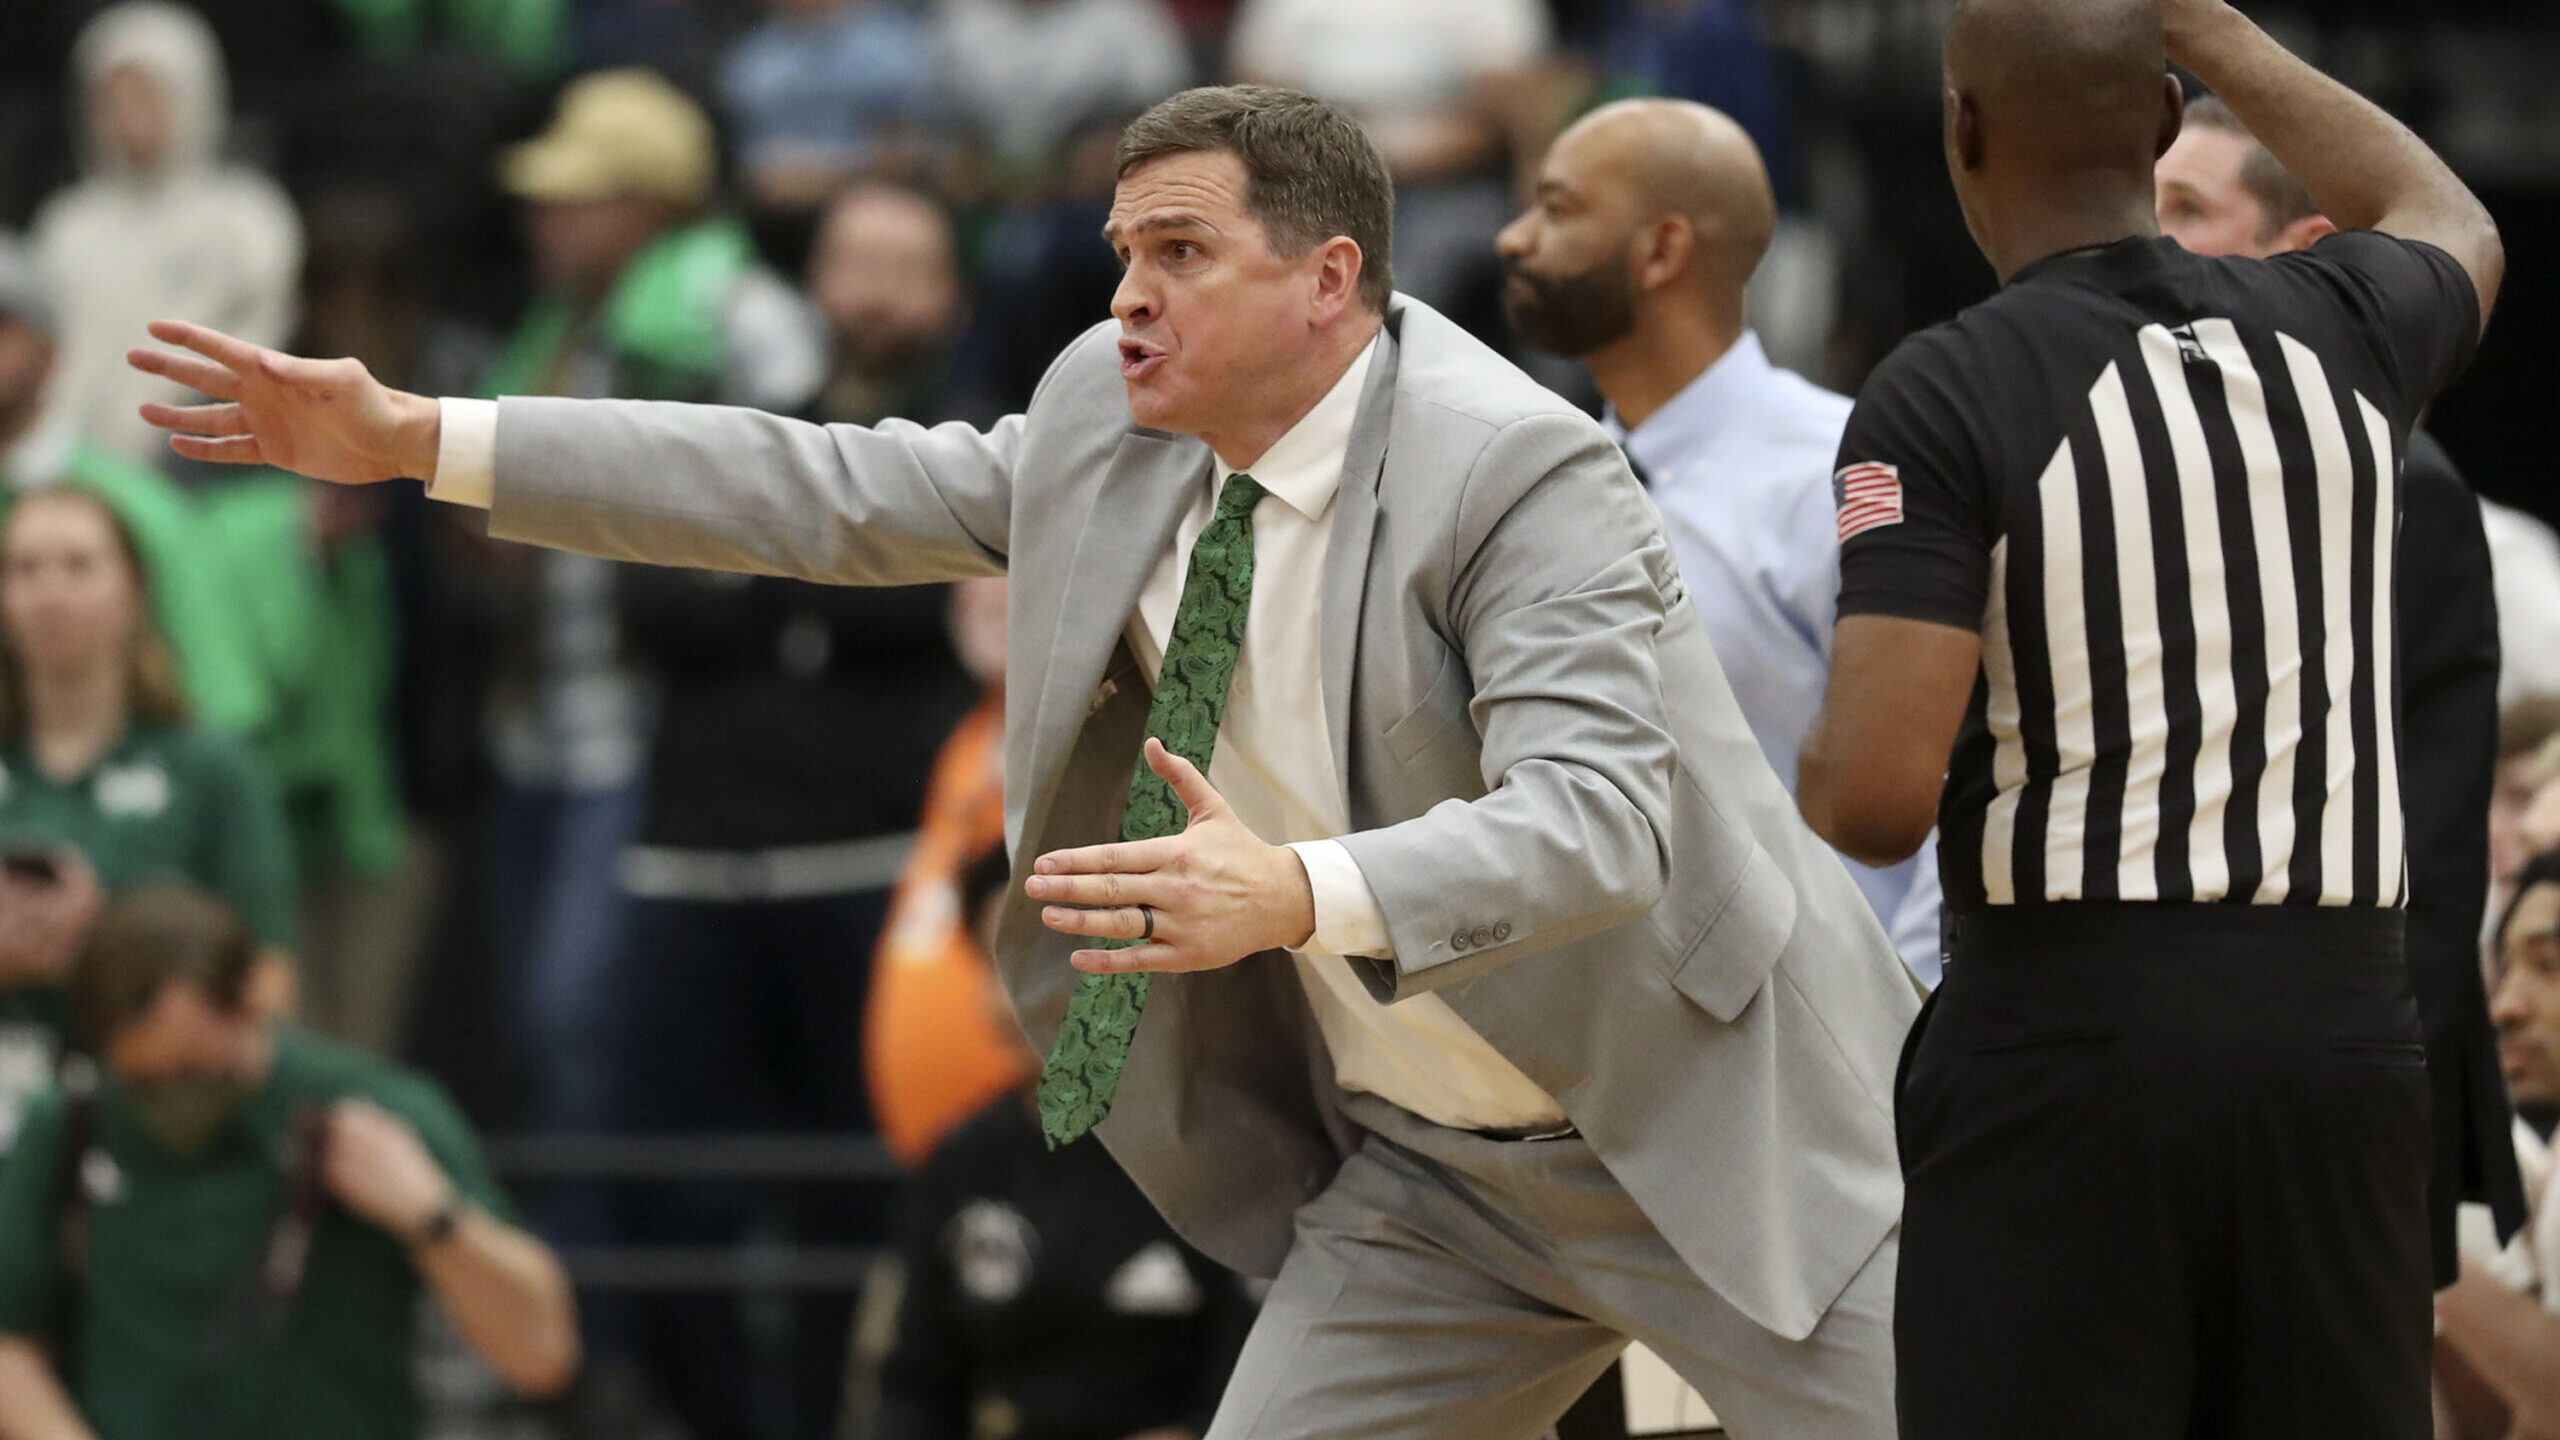 Utah Valley University coach Mark Madsen directs his players during a basketball game against BYU a...